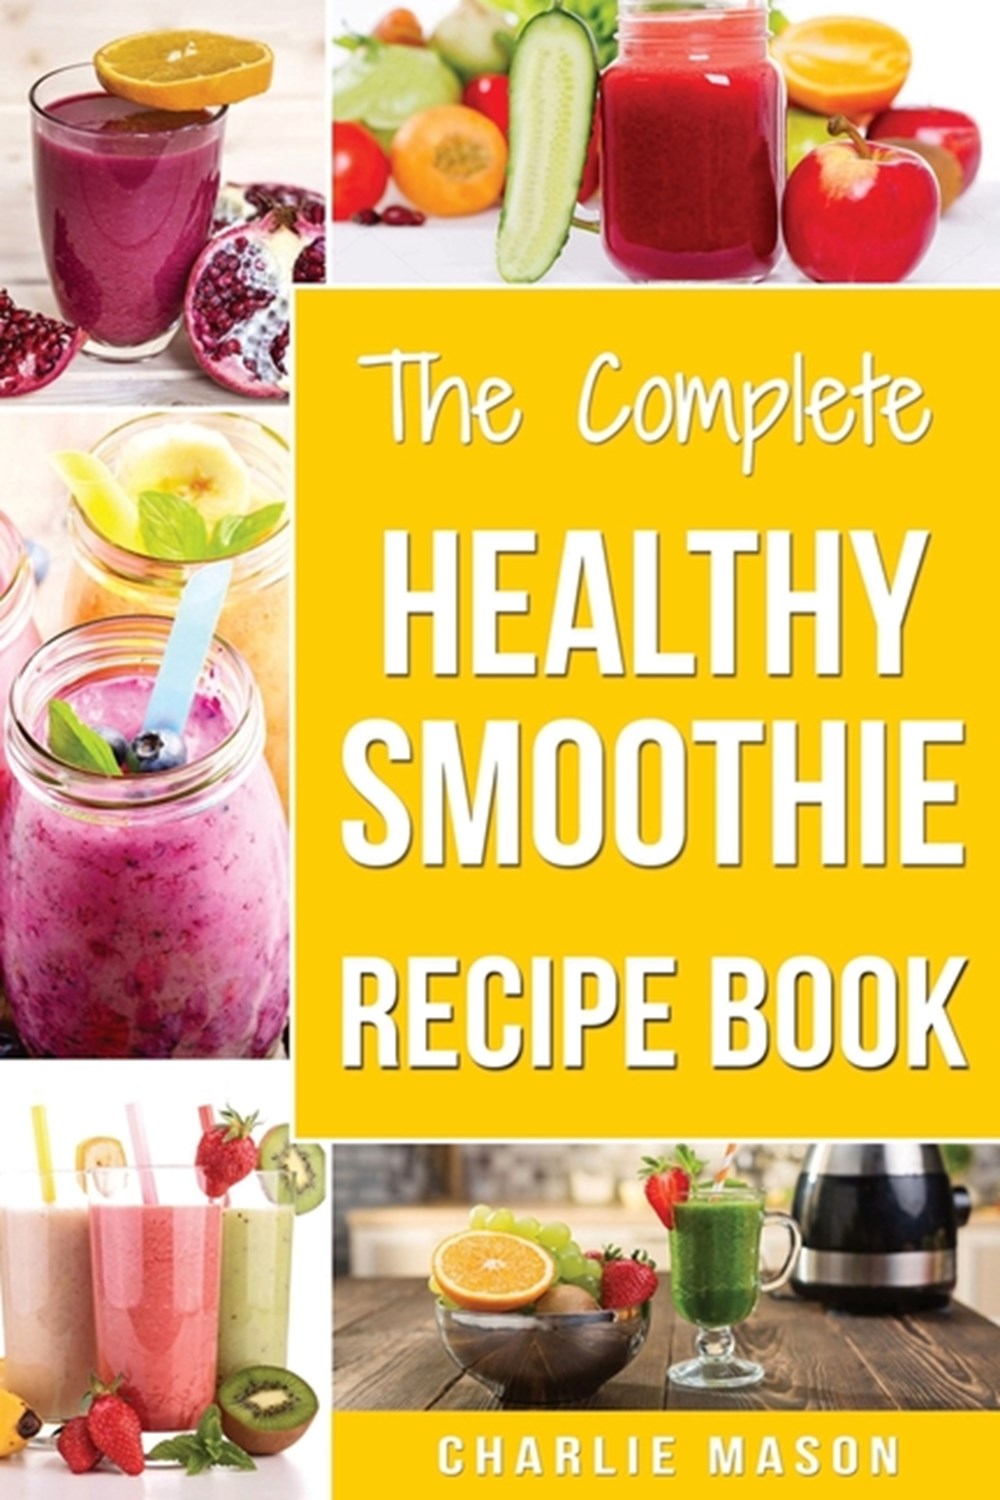 The Complete Healthy Smoothie Recipe Book in Paperback by Charlie Mason